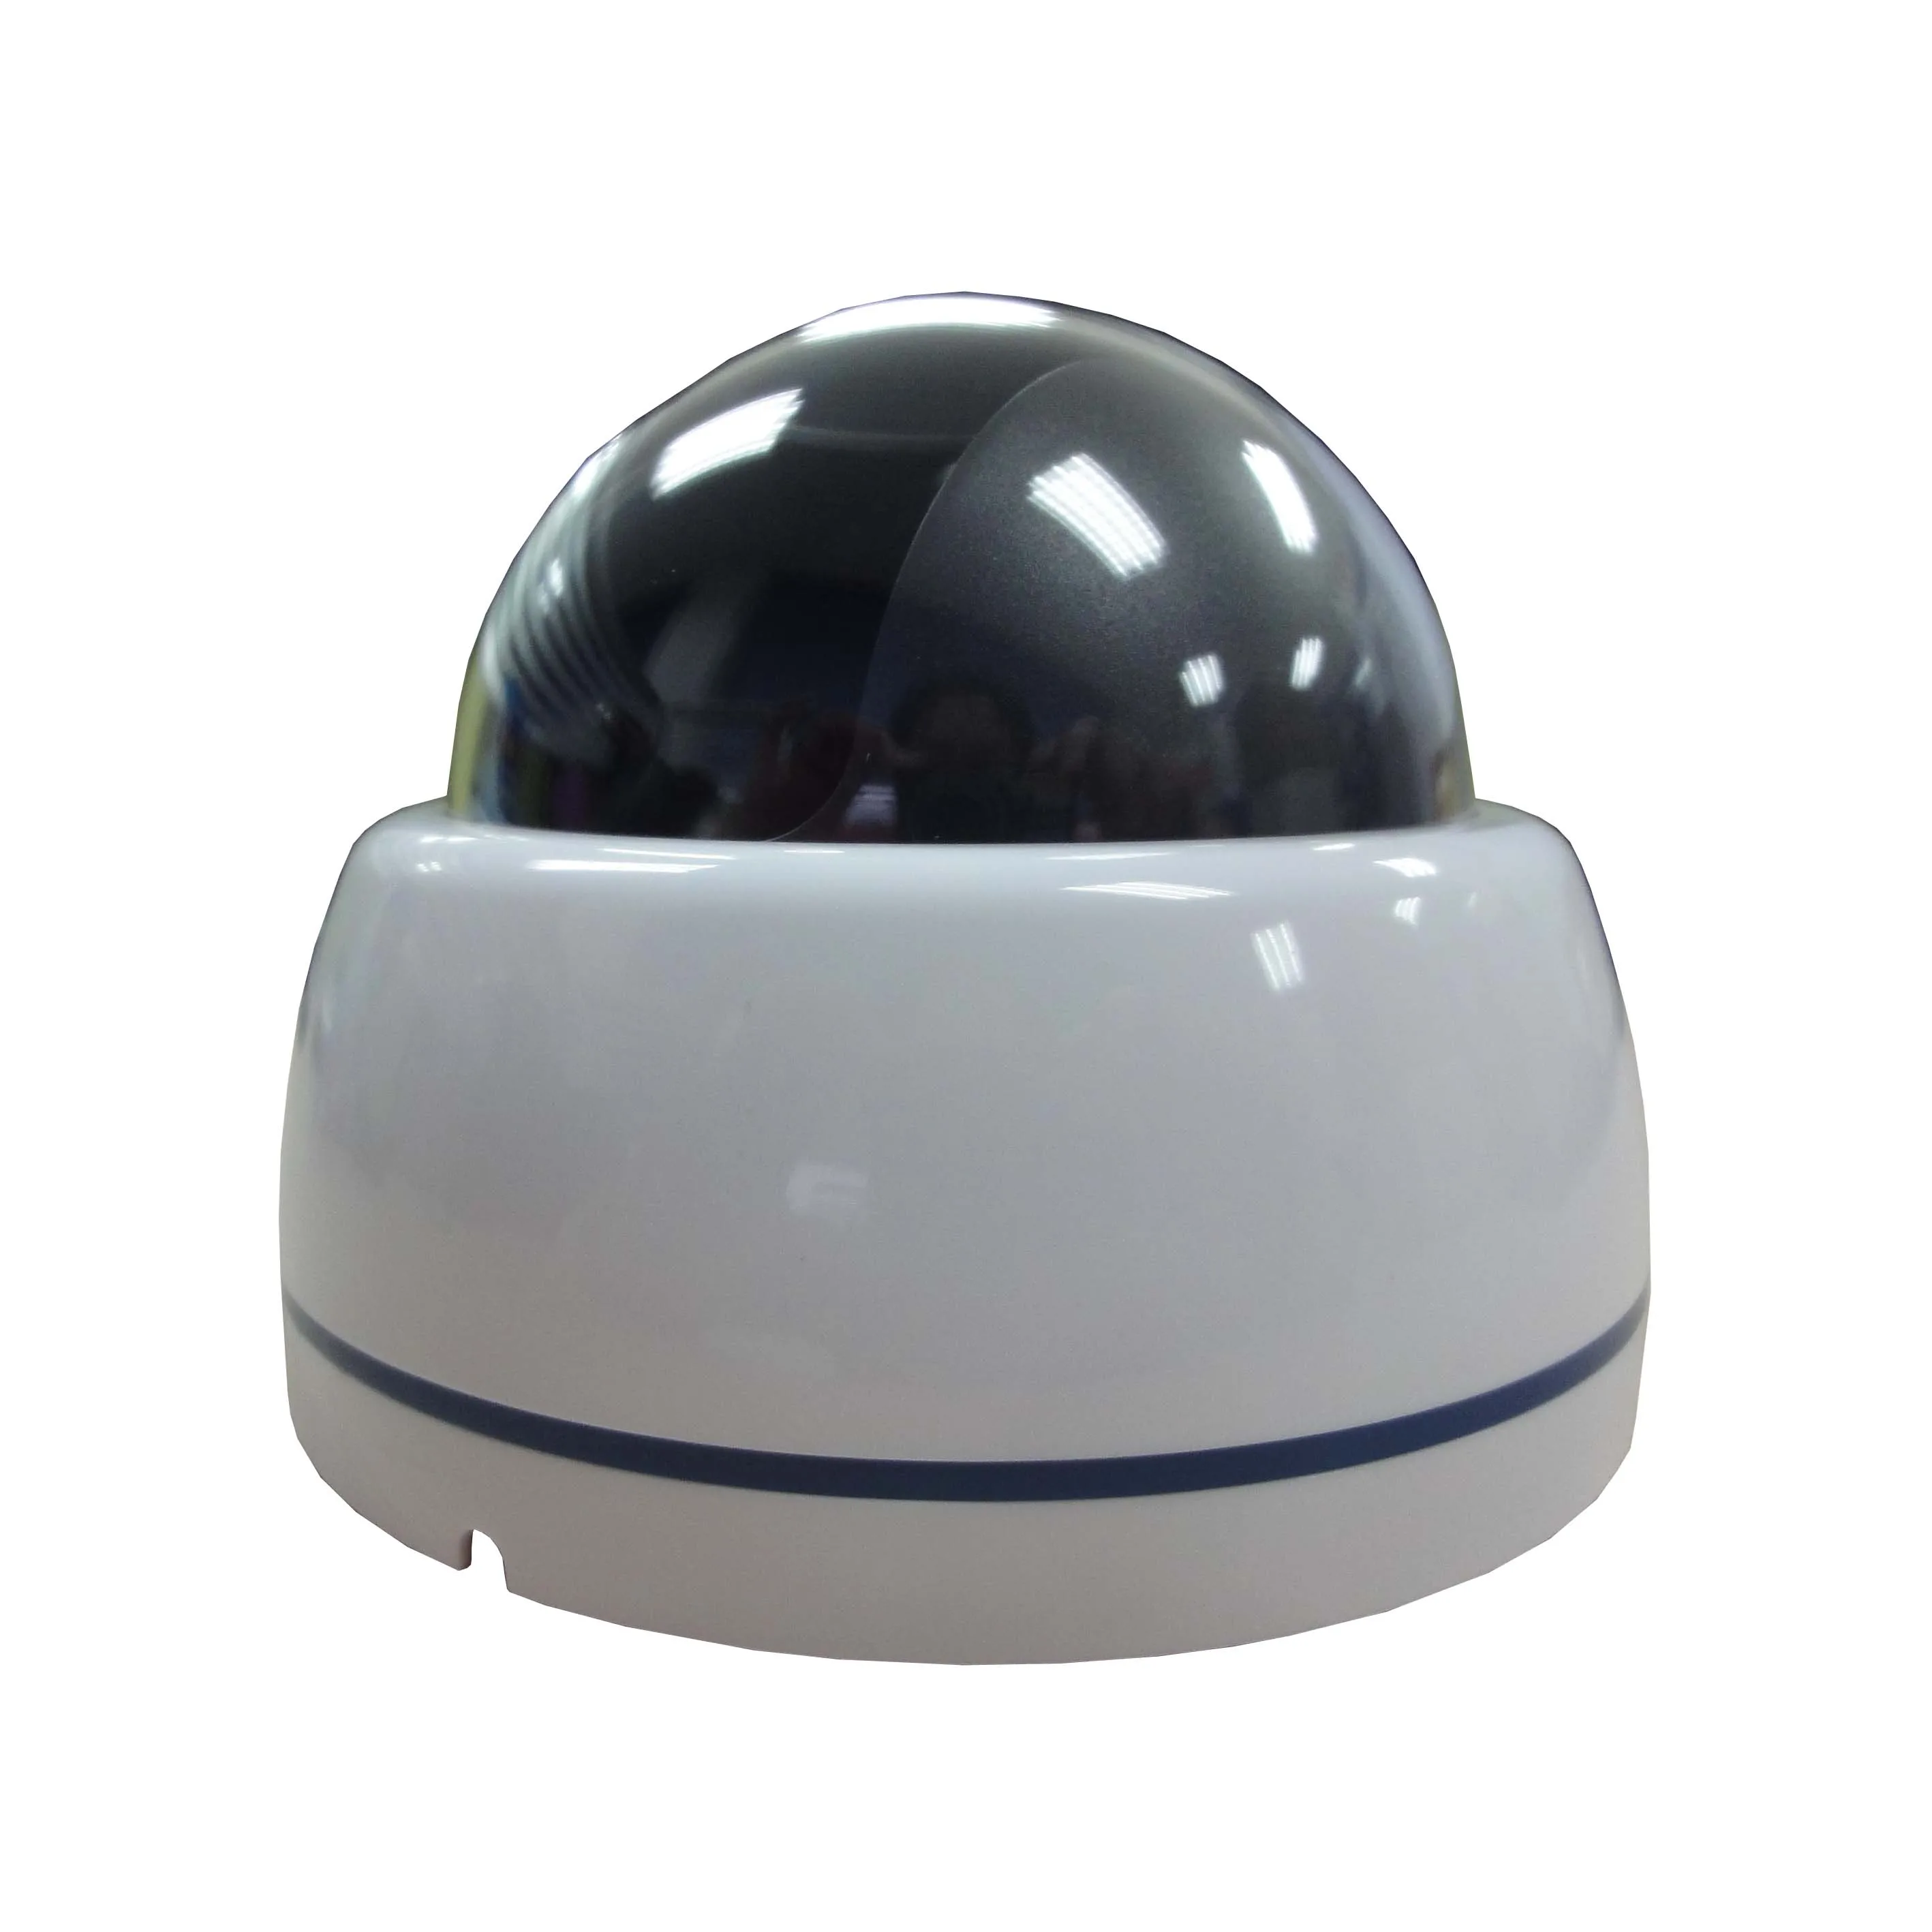 3.3 inch IR Camera Dome Case for CCTV Cameras, clear dome covers